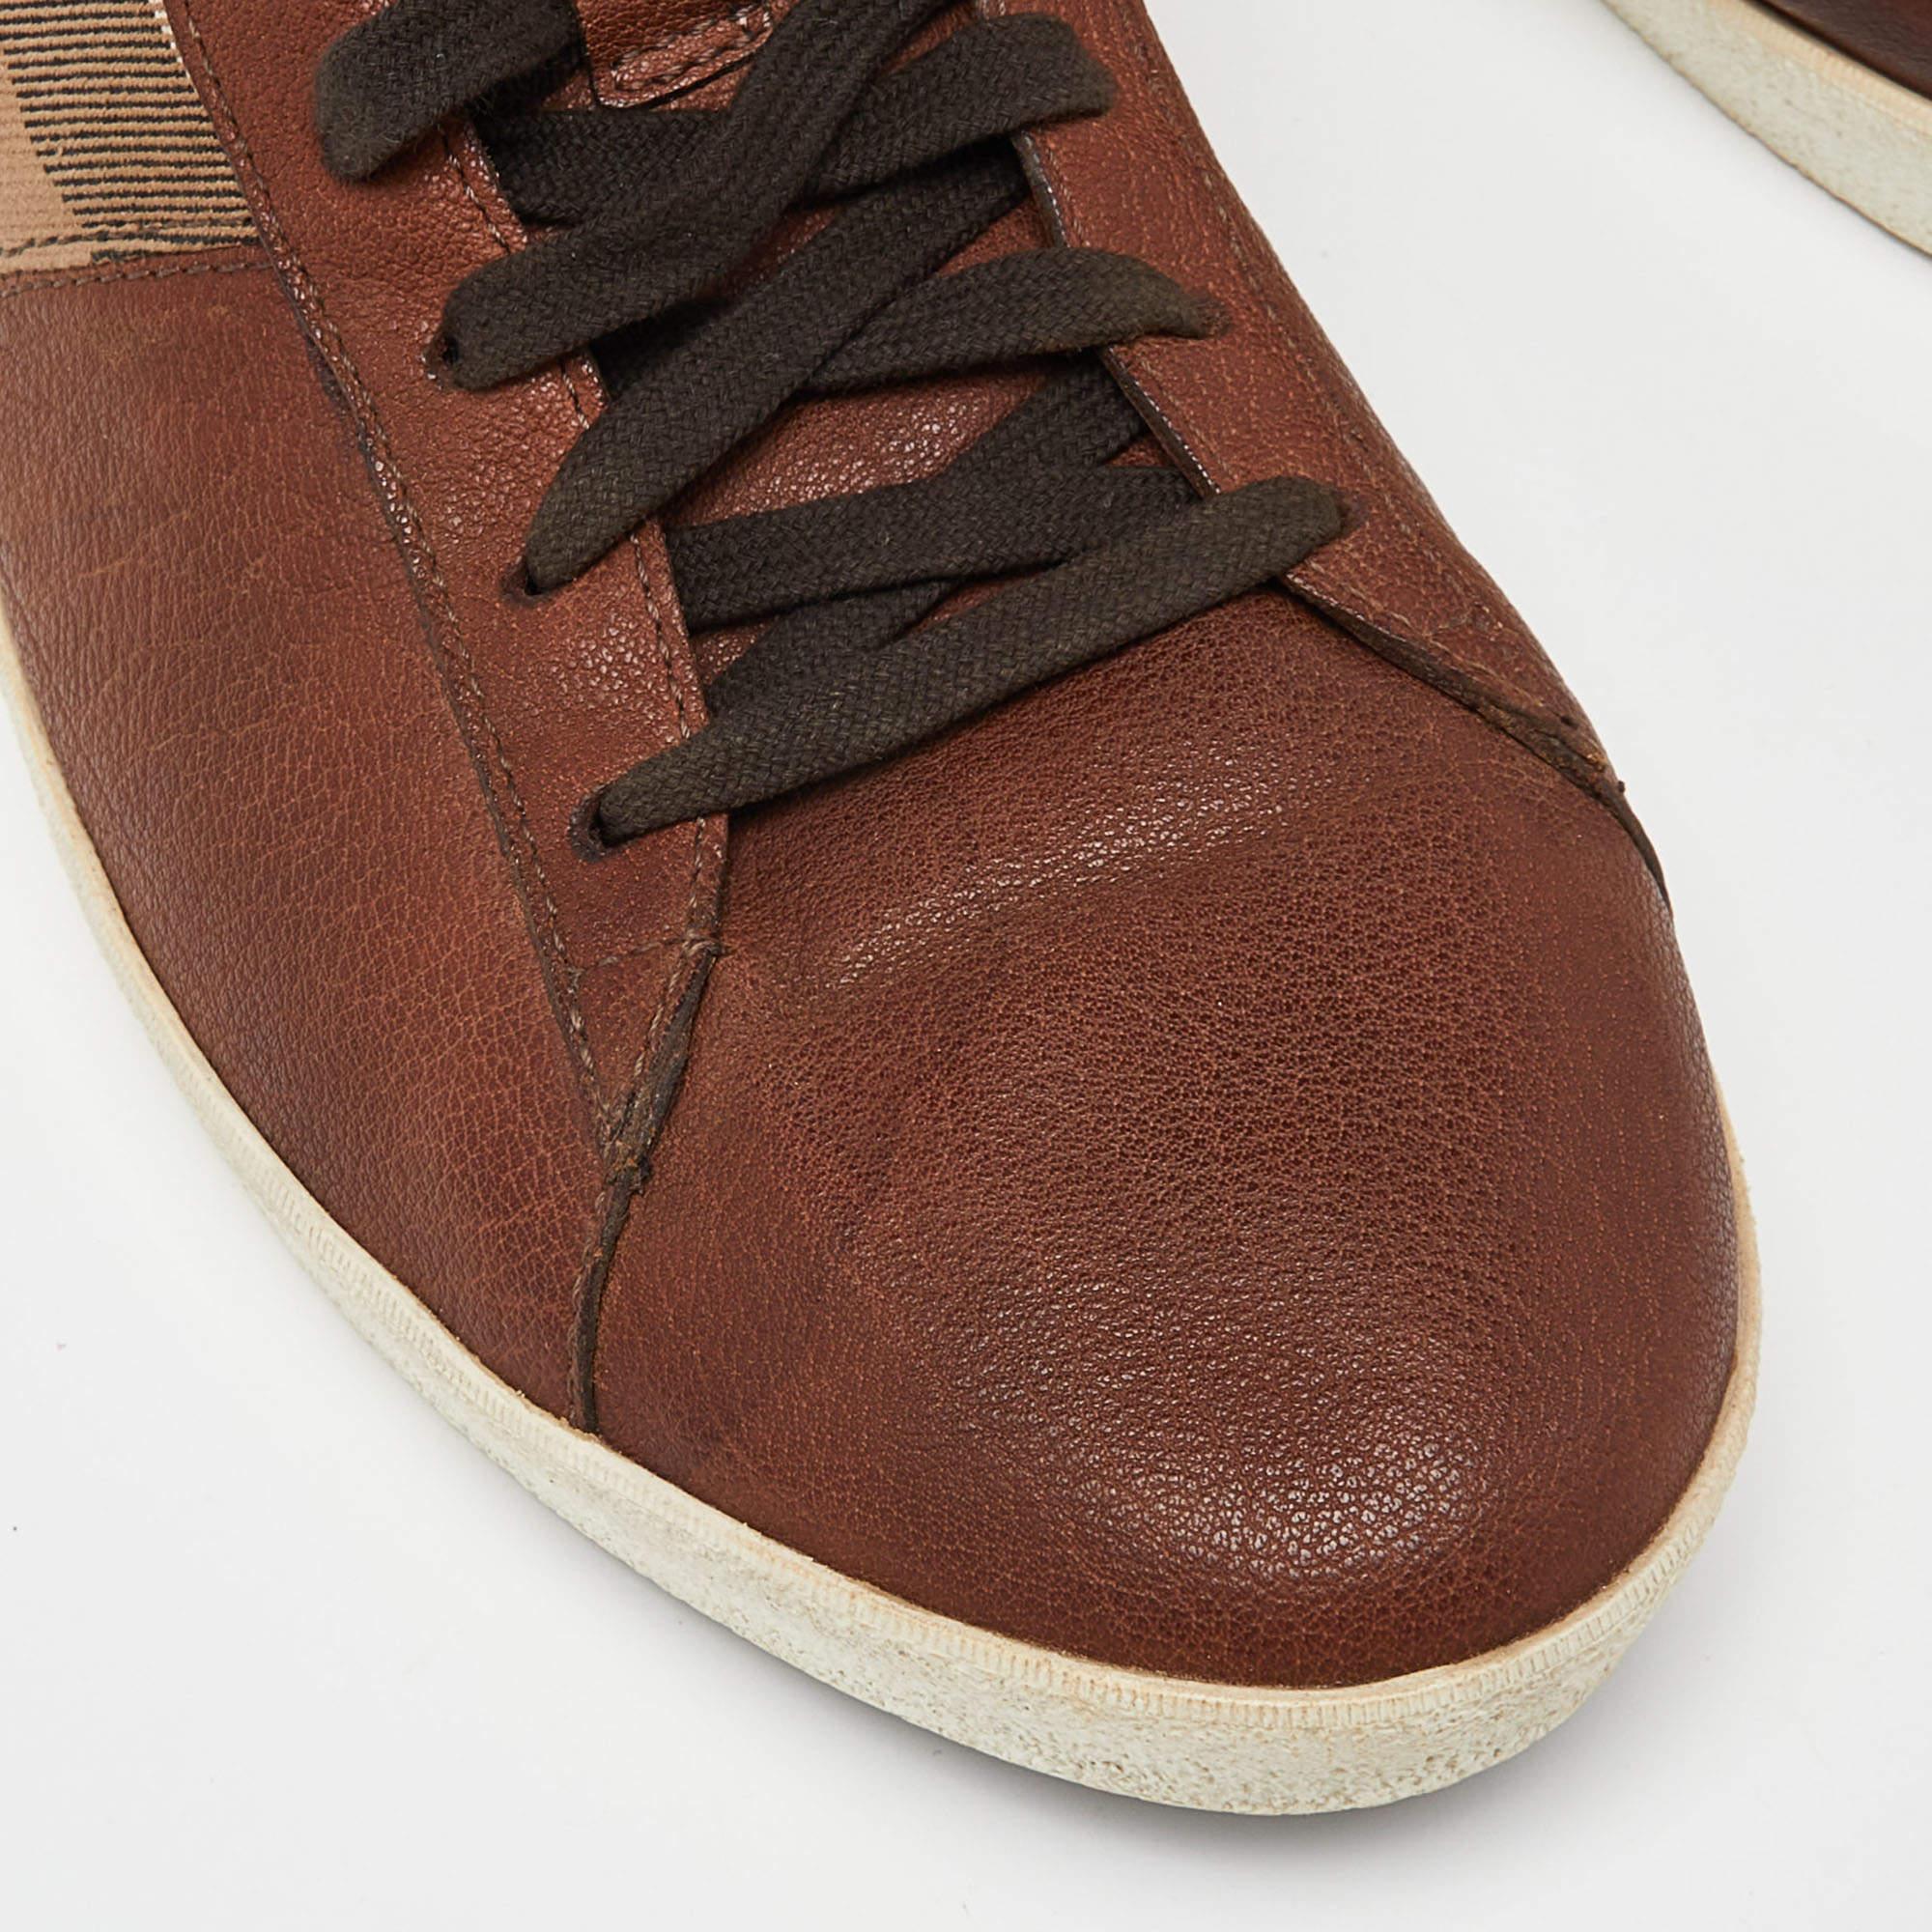 A simple high-top leather design is updated with Burberry's iconic check canvas to form these luxe sneakers for men. Set on a durable rubber sole, this pair is secured with brown laces on the vamps. Style yours with smart casuals.

